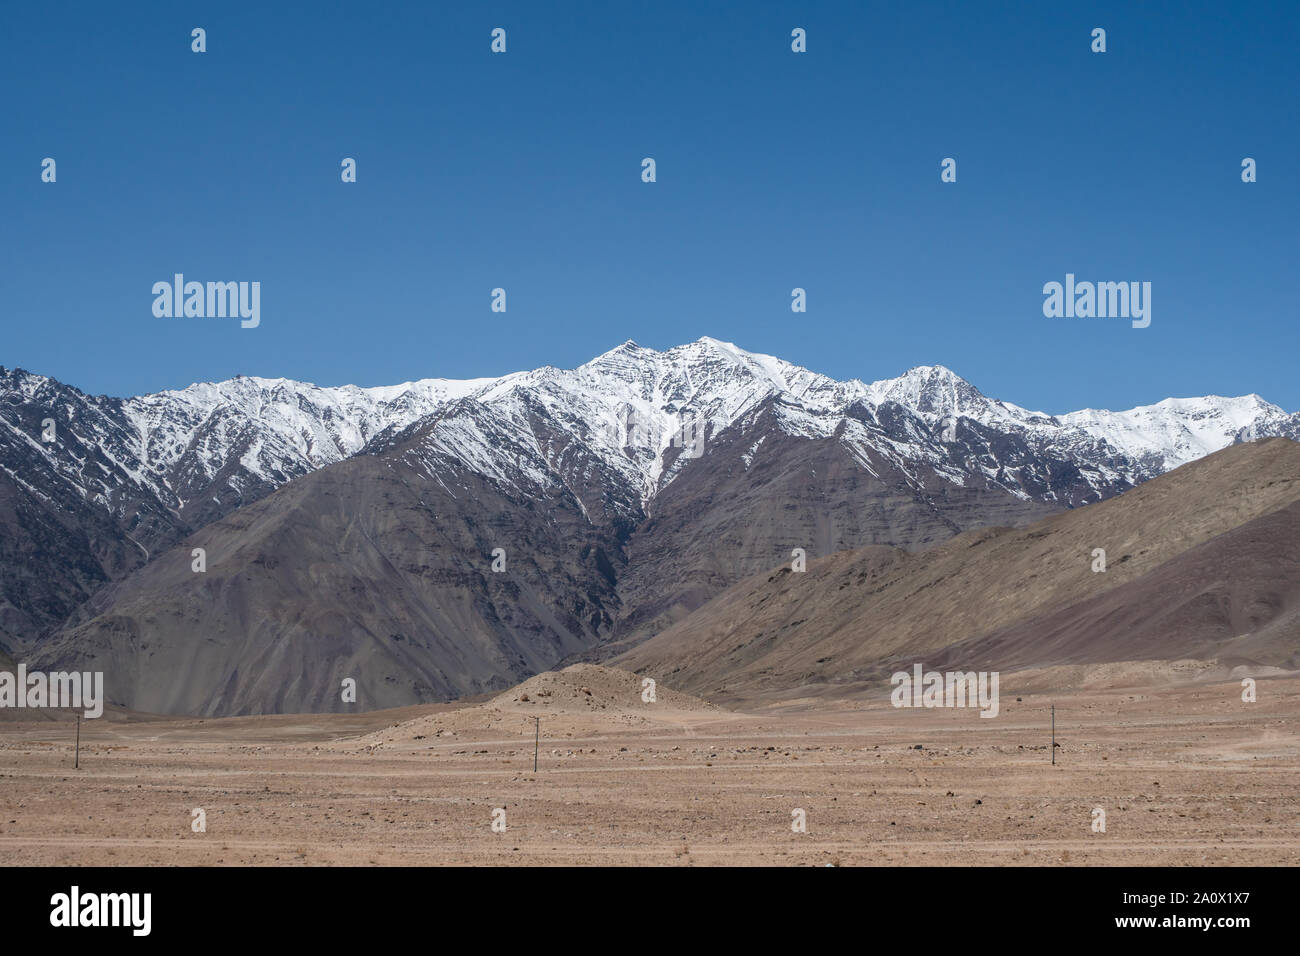 The snow mountain range around Leh city located in northern India state of Jammu and Kashmir, India. Stock Photo